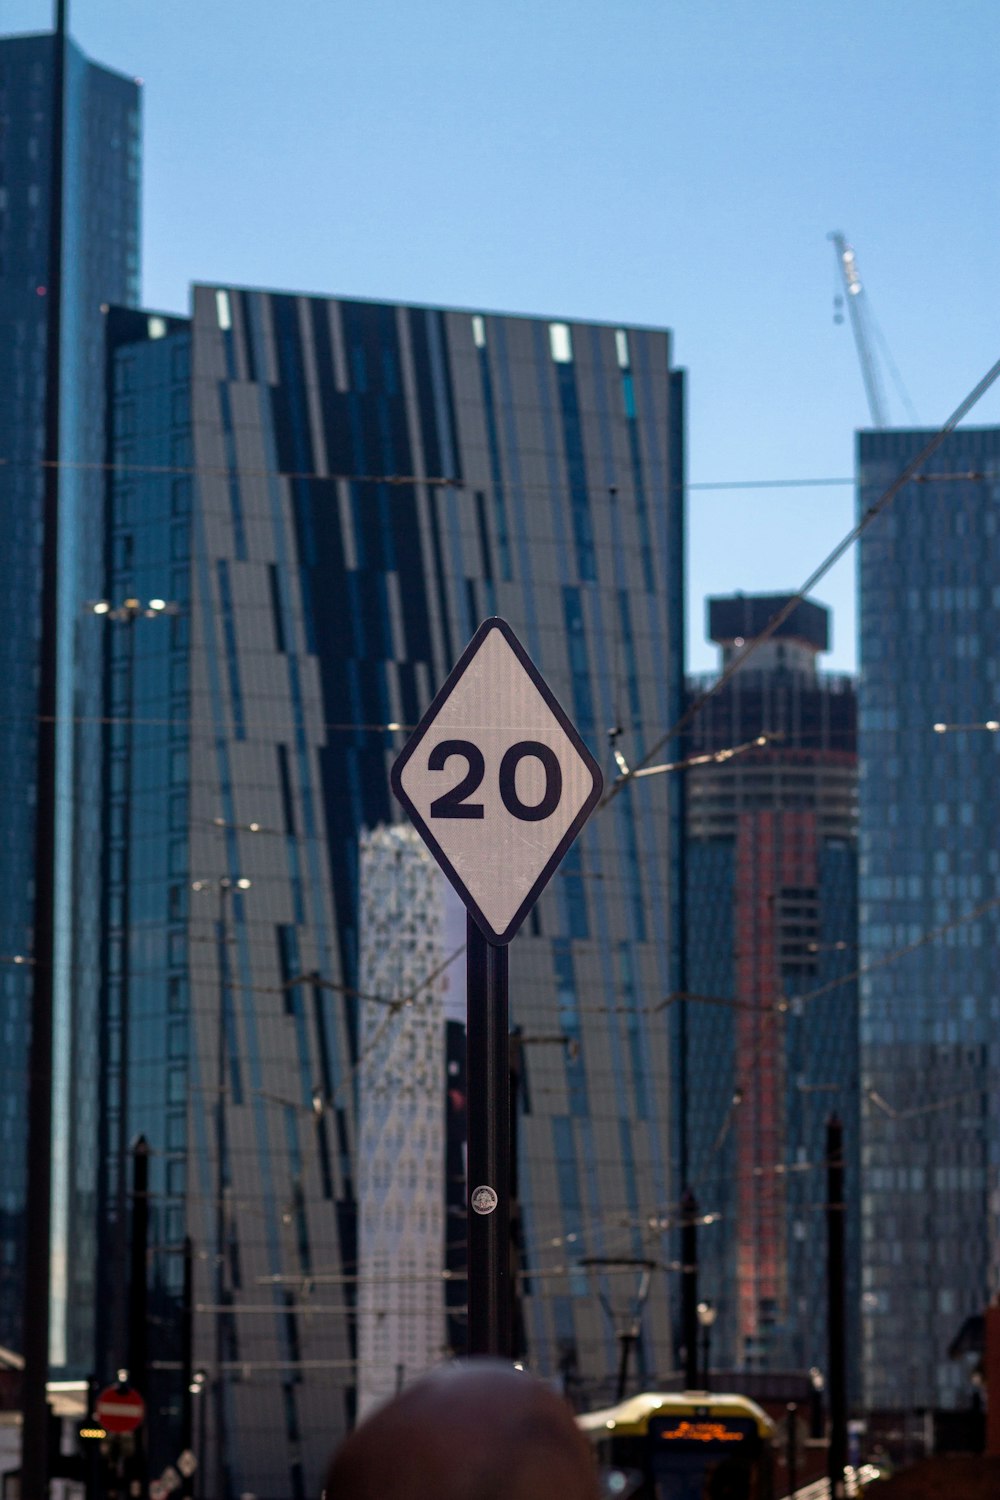 a street sign in front of some tall buildings